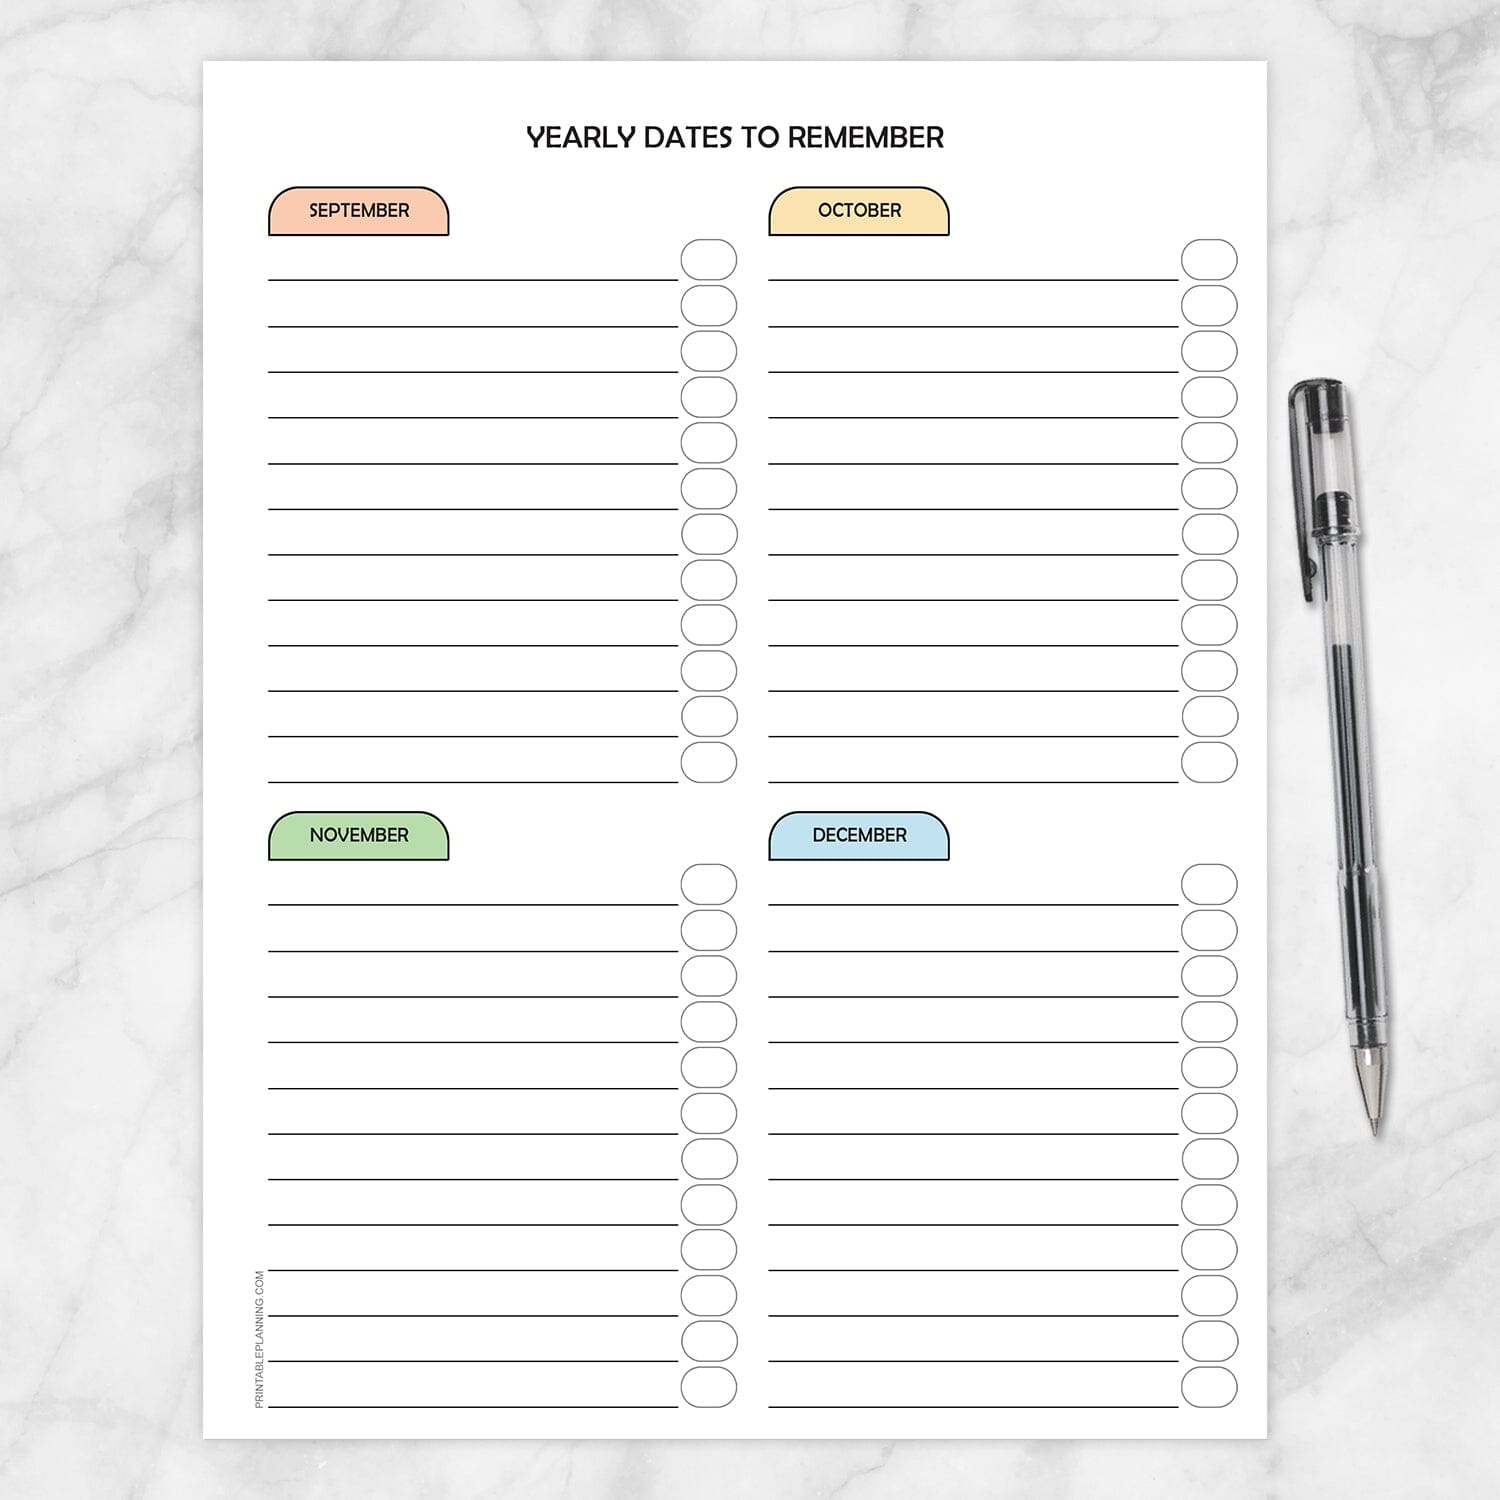 Printable Modern Yearly Dates to Remember Pages (page 3 of 3) at Printable Planning.